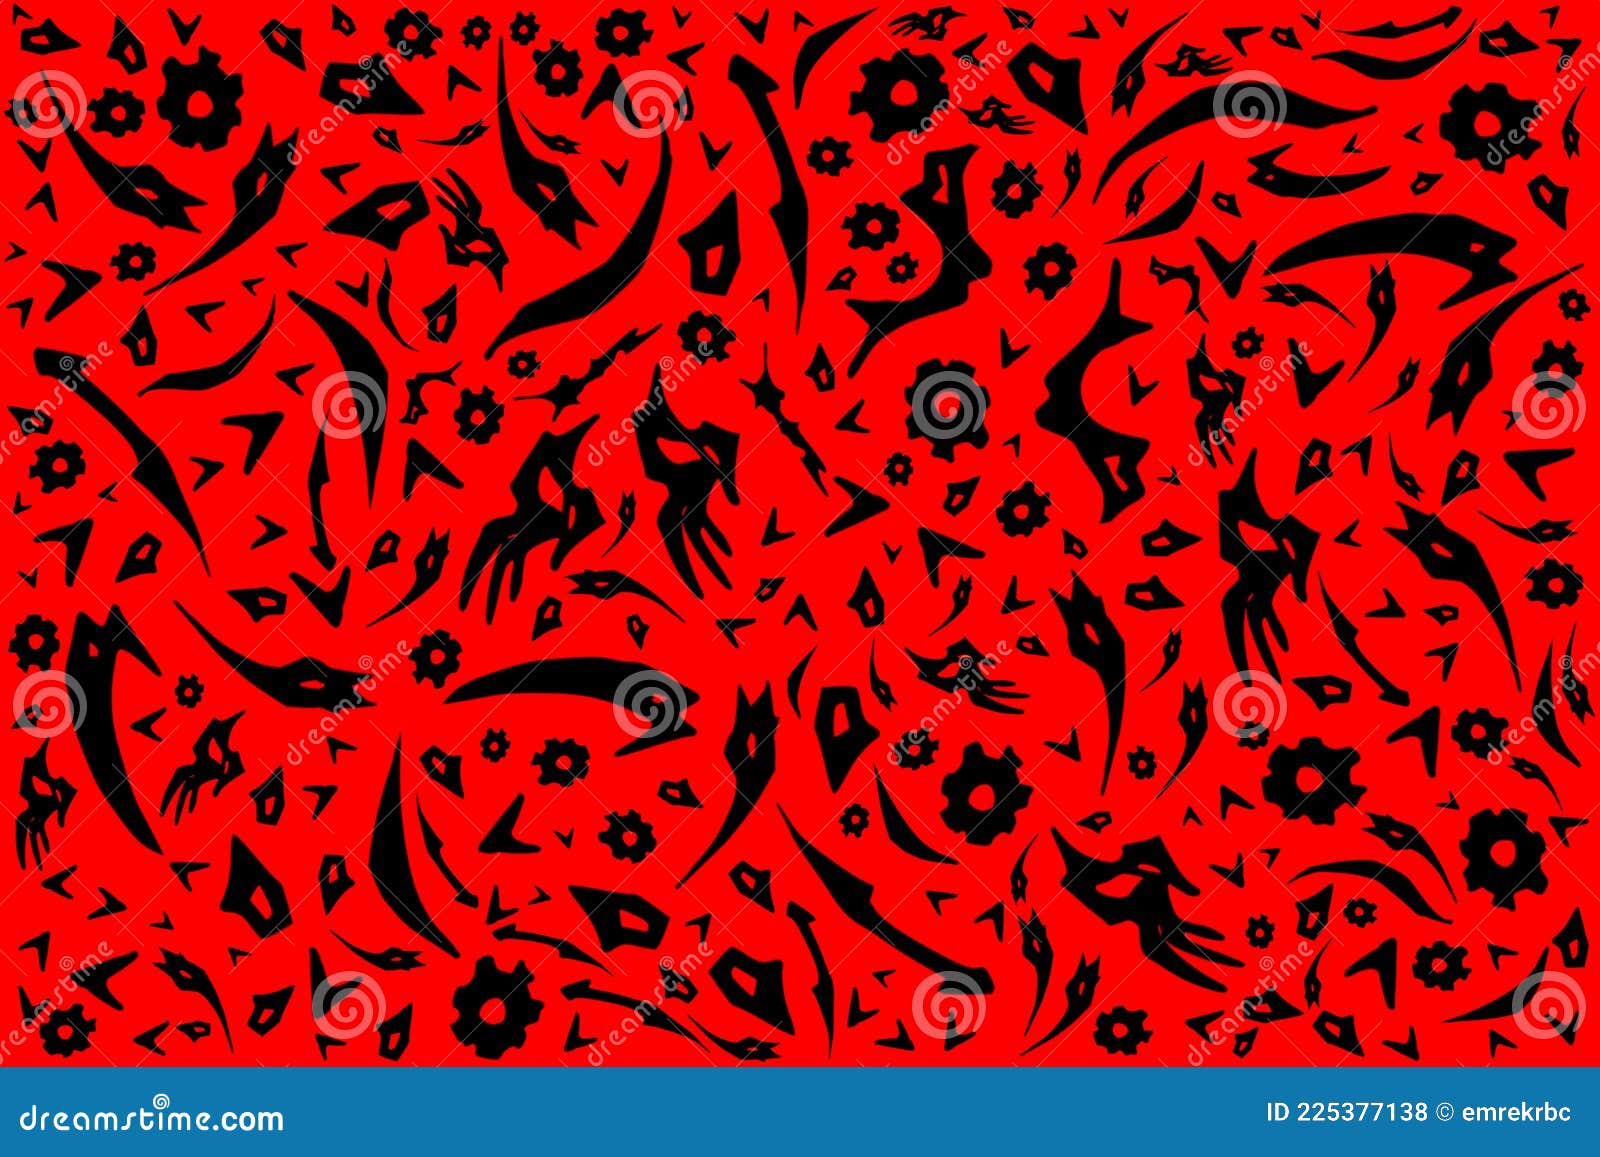 Mixed Black Shapes and Patterns on Red Background for Design Material or  Print Stock Illustration - Illustration of irregular, doodle: 225377138